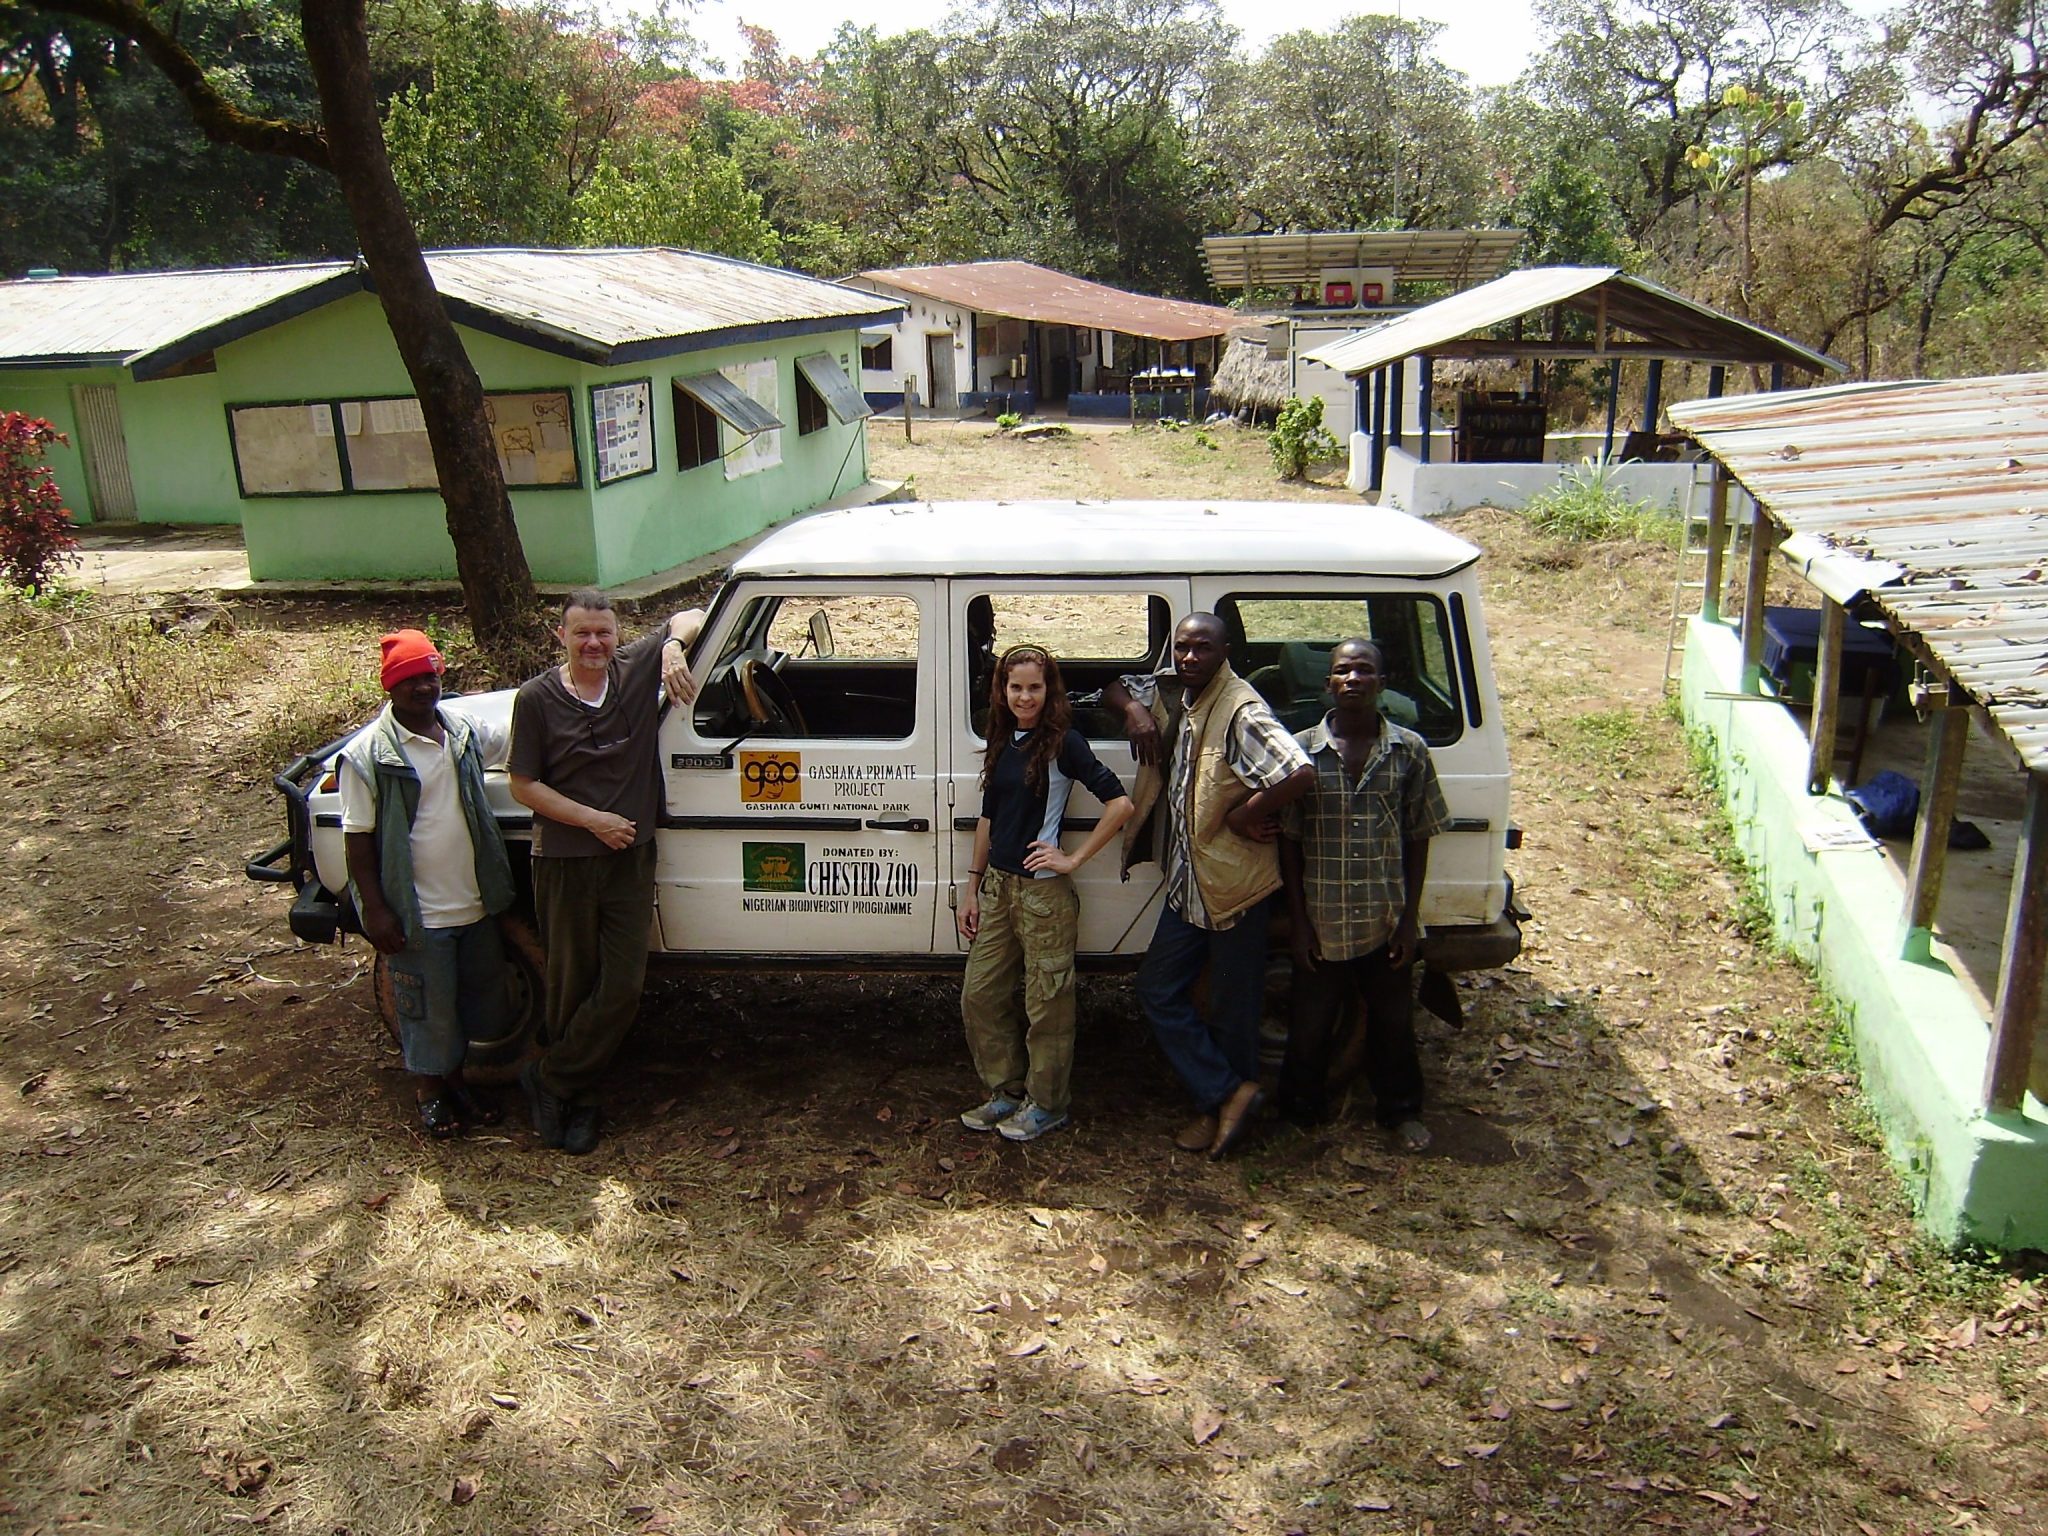 Chester Zoo staff in Nigeria with project team, Africa, Nigeria